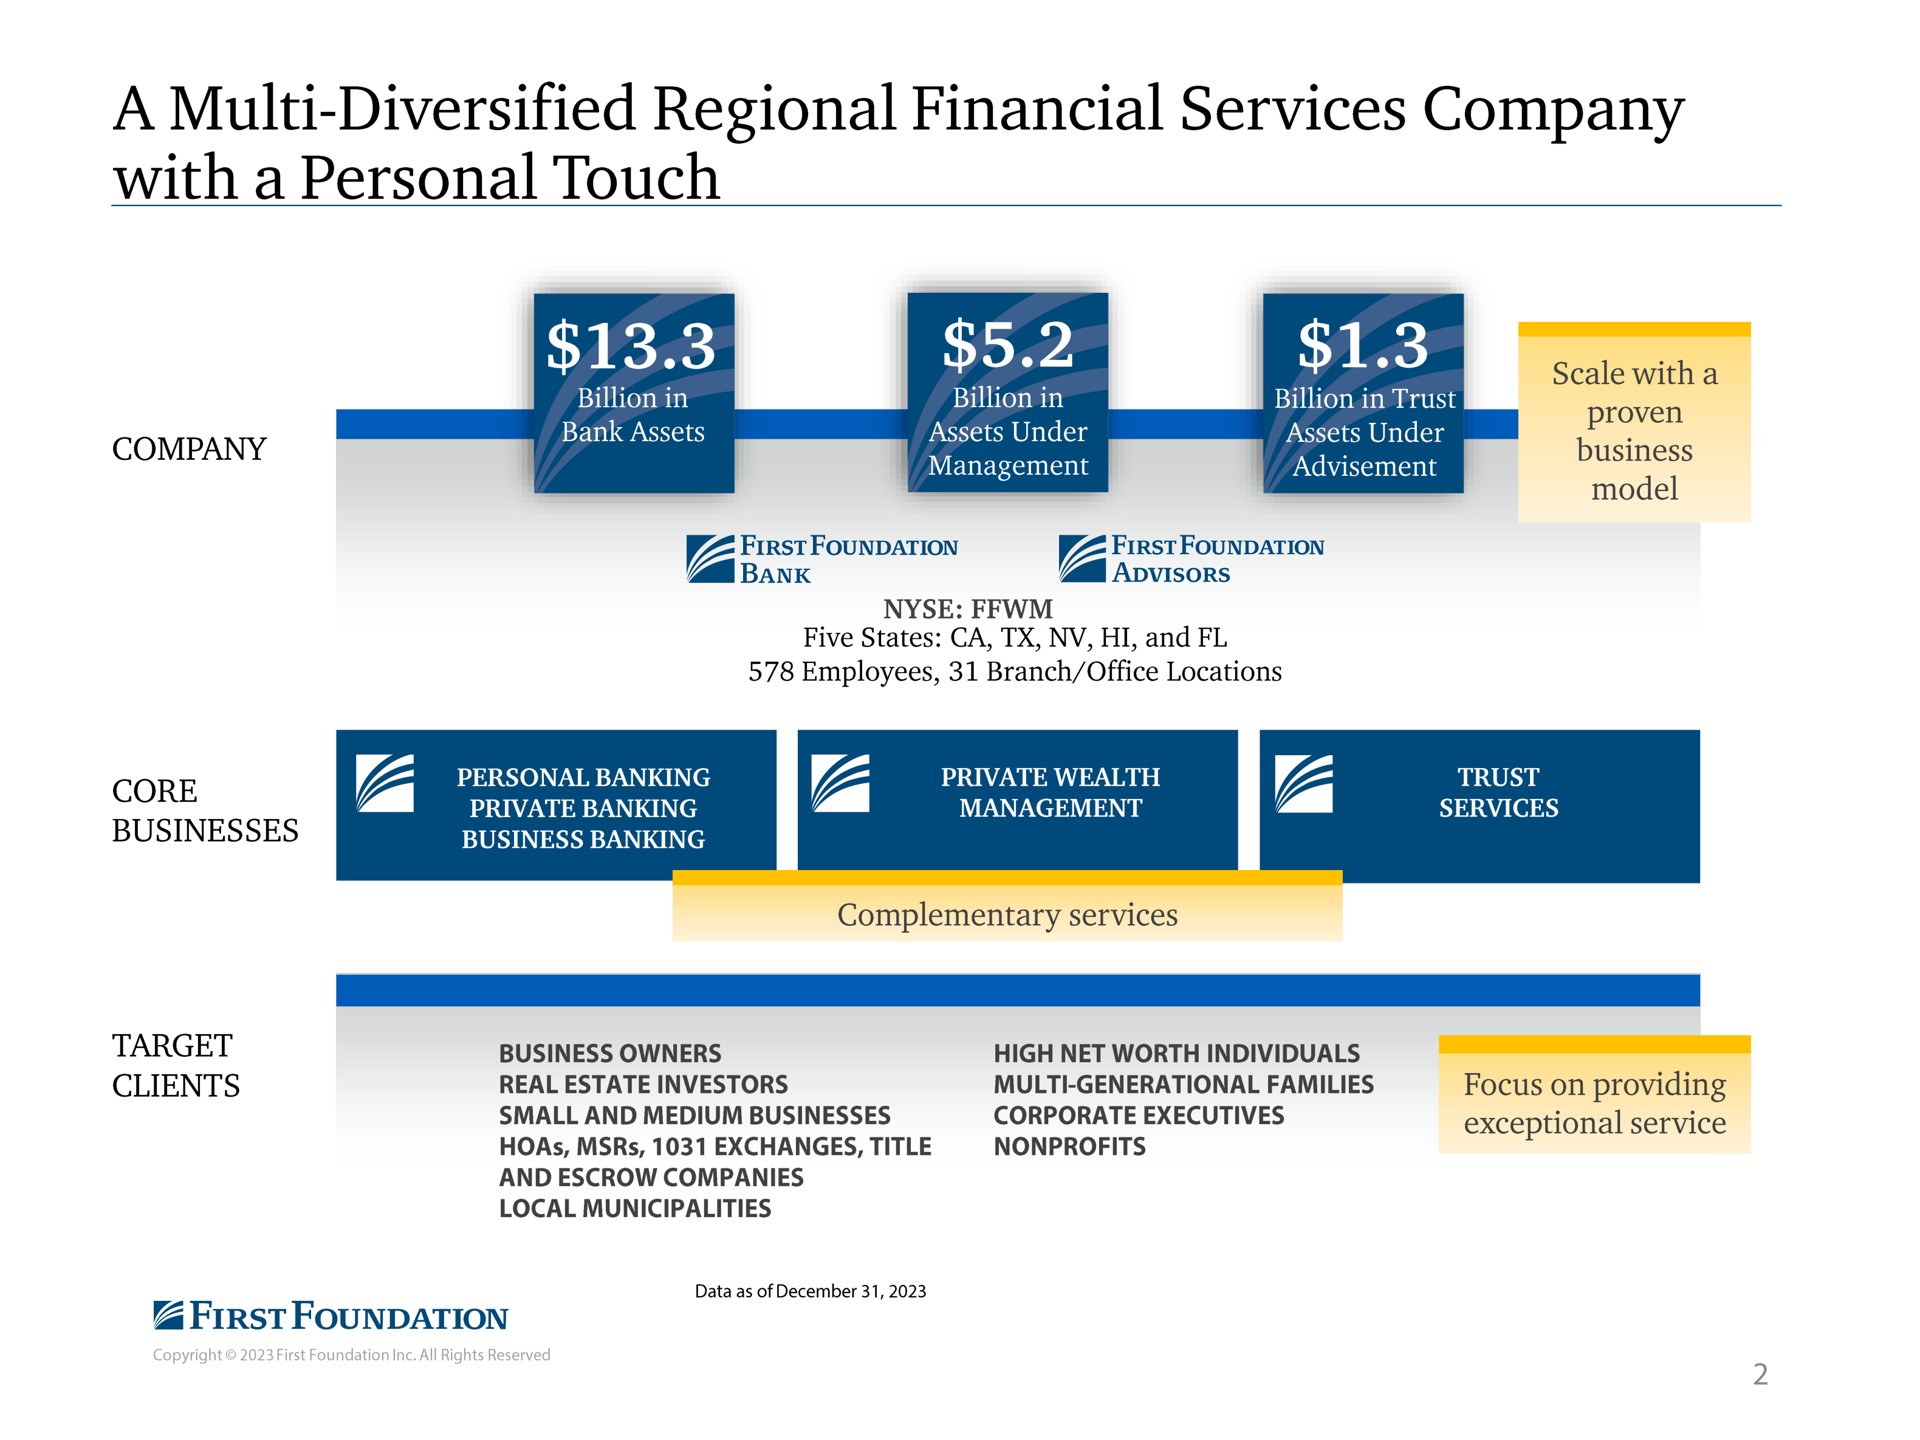 a diversified regional financial services company with a personal touch poe small and medium businesses exchanges title and escrow companies local municipalities corporate executives nonprofits exceptional service | First Foundation